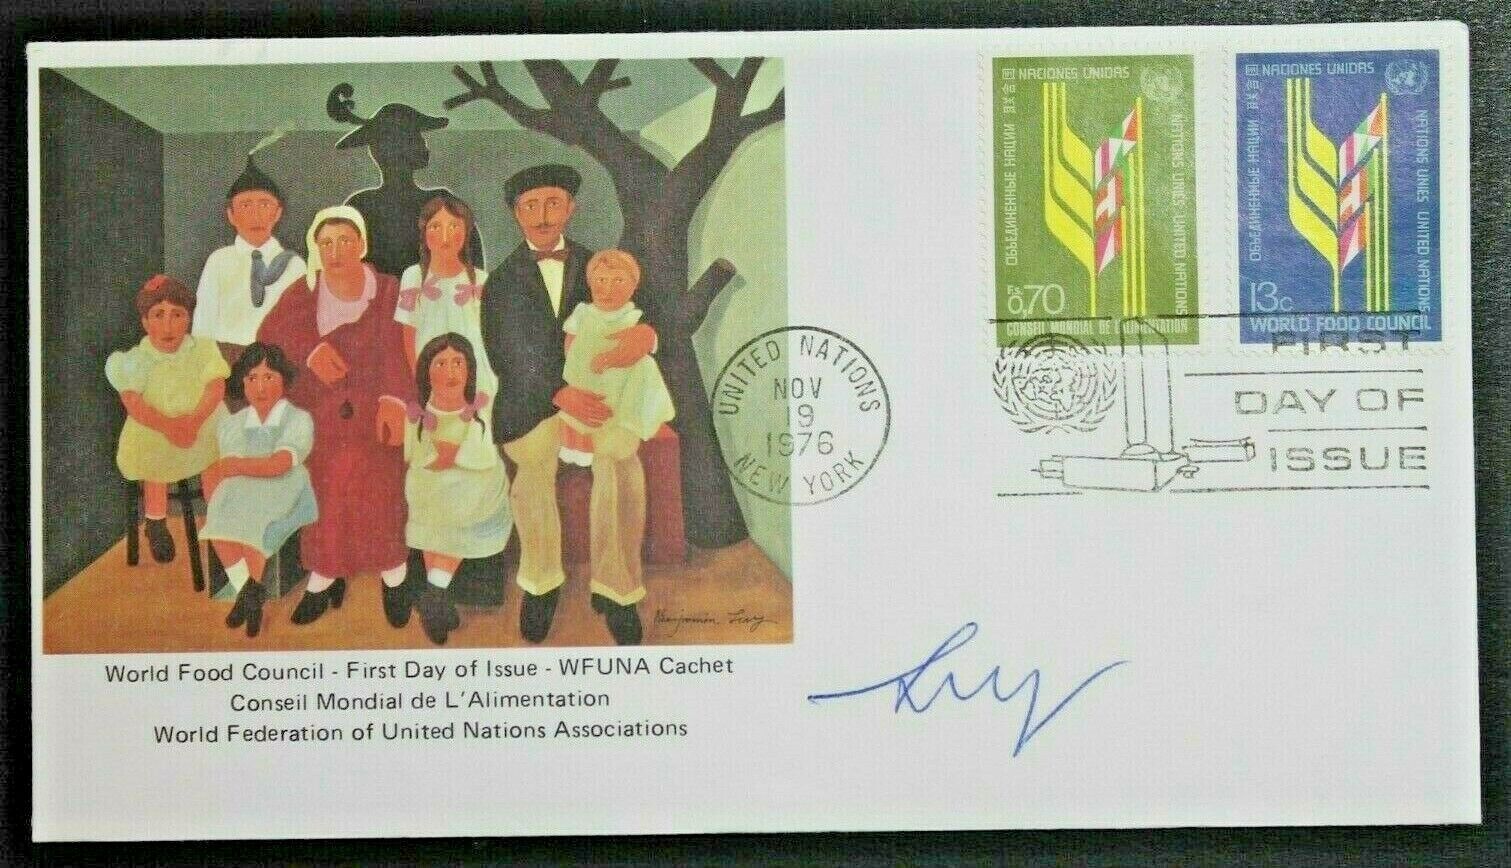 Benjamin Levy Artist Signed Autographed 1976 First Day Cover Food Council WFUNA